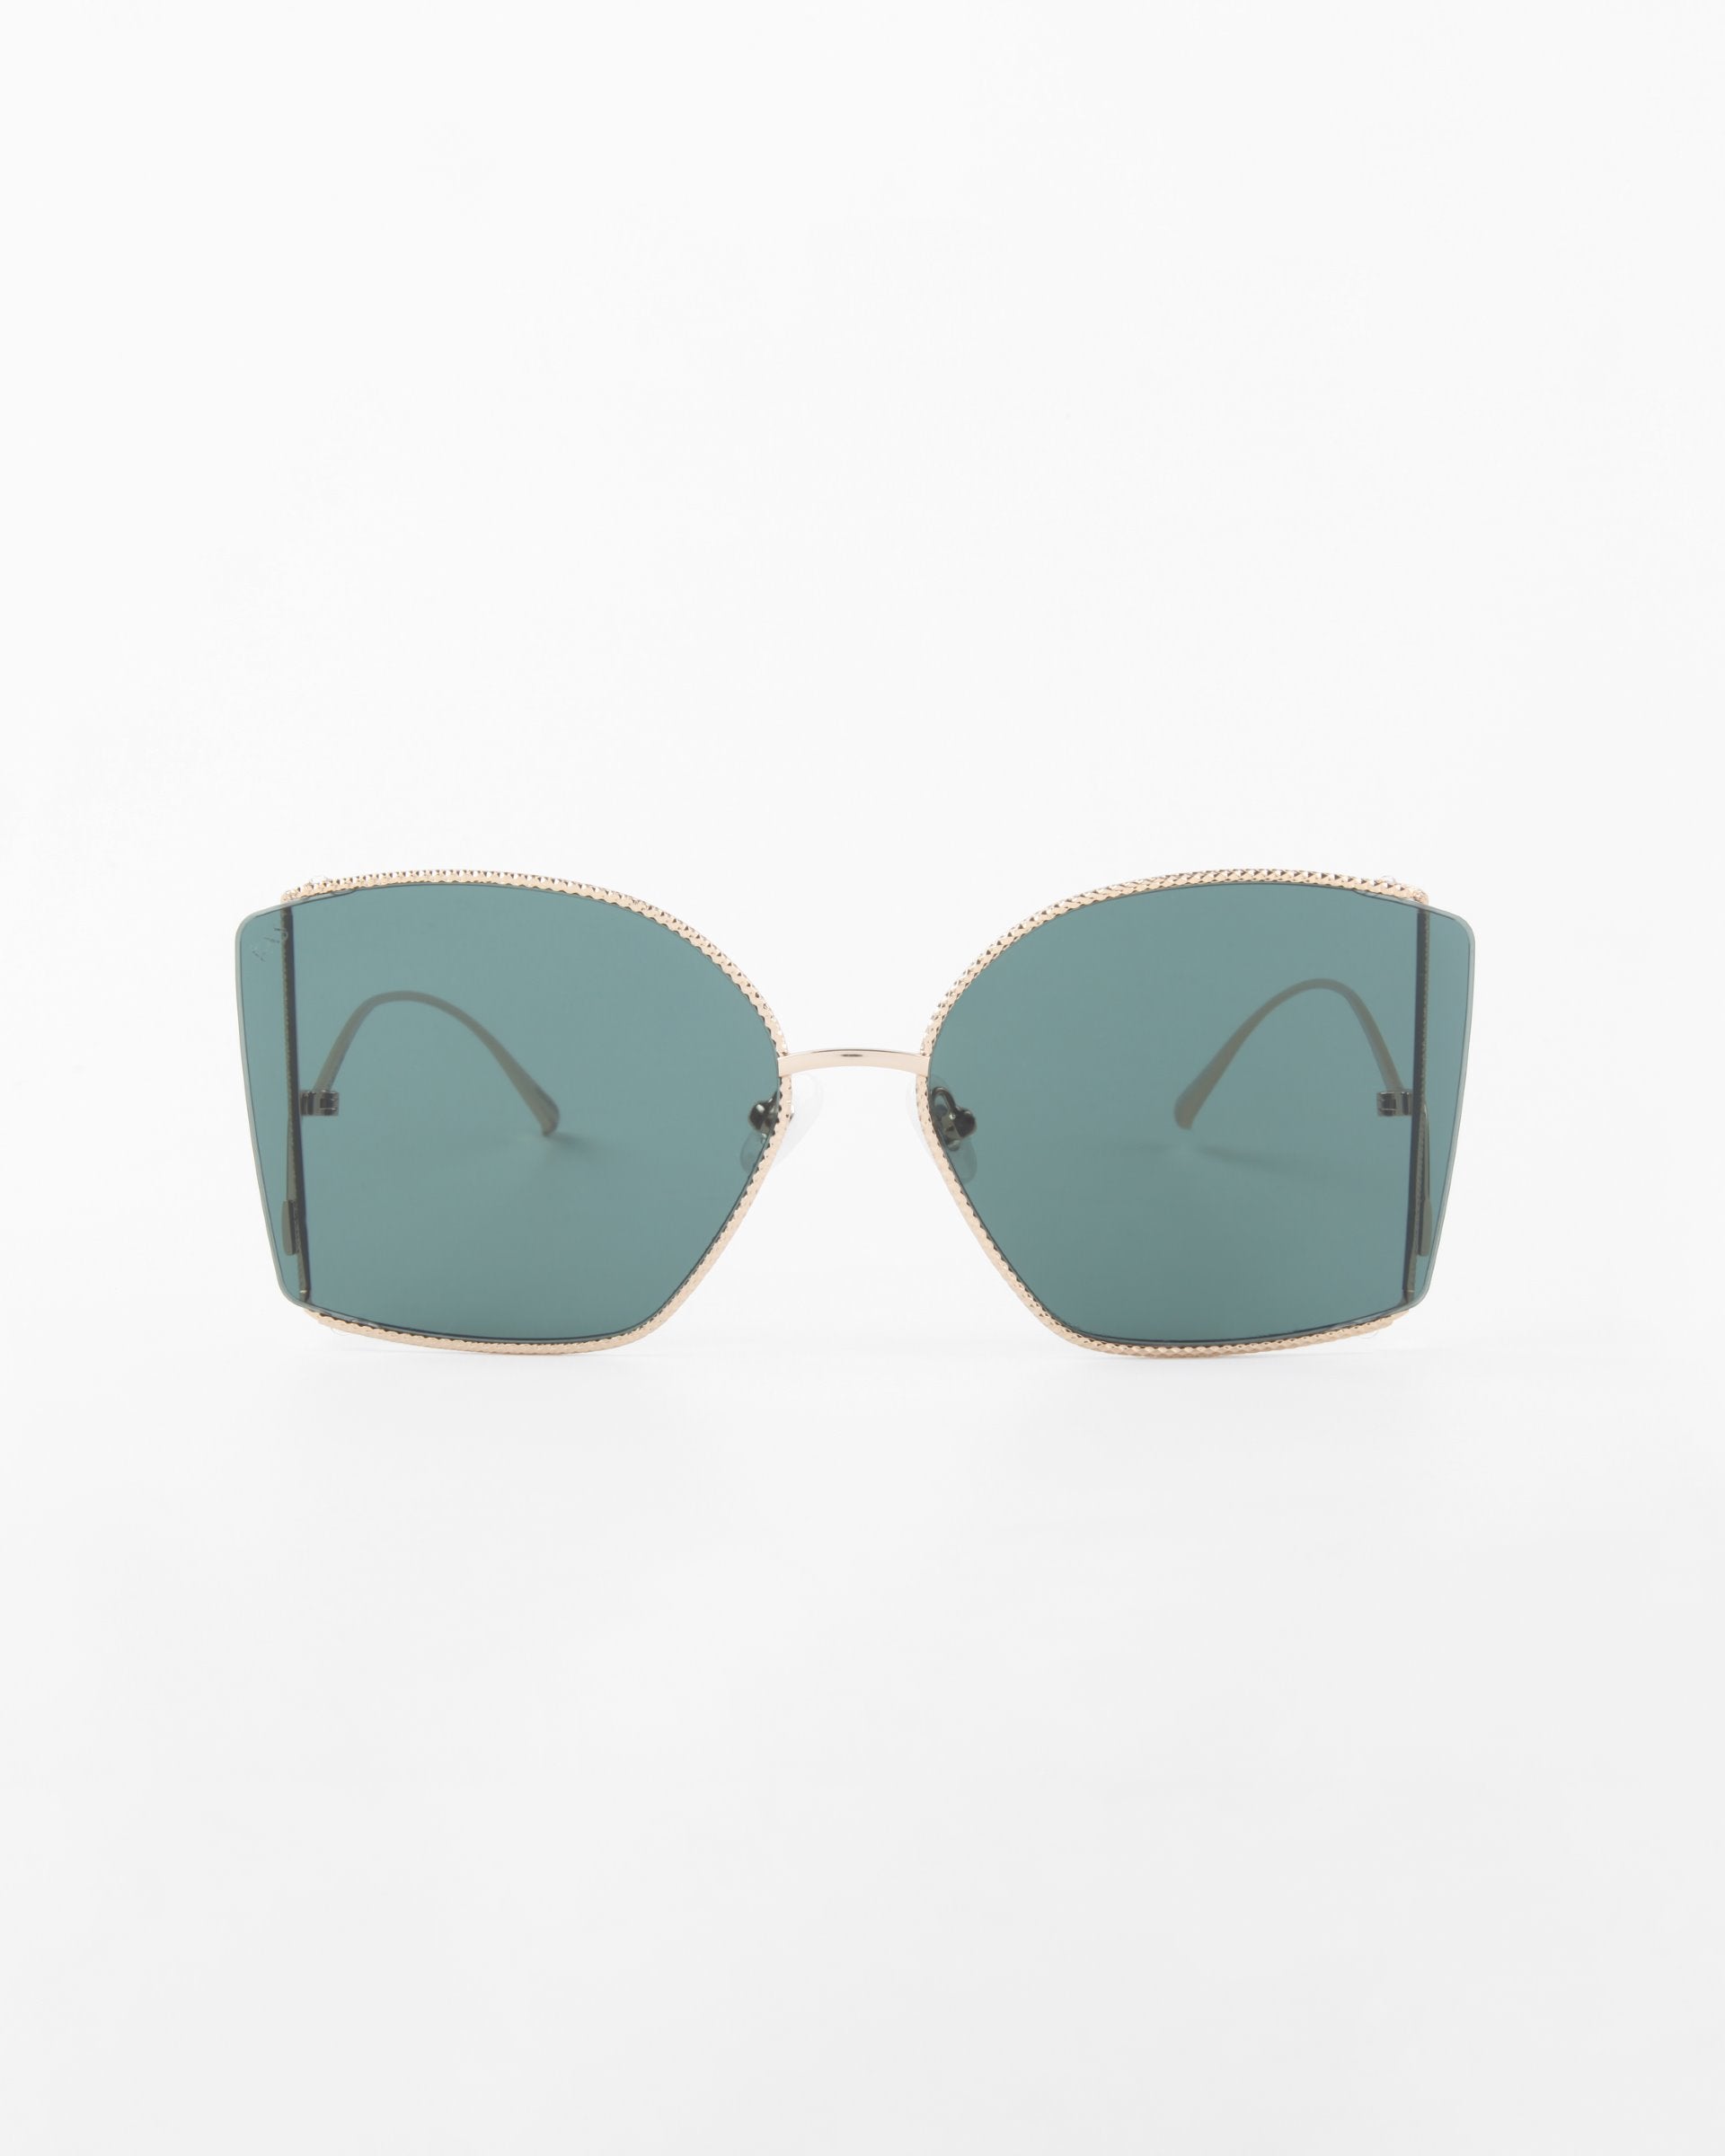 A pair of sunglasses, Dixie by For Art's Sake®, with oversized square frames and dark green, shatter-resistant nylon lenses. The glasses feature handmade gold-plated frames and gold arms that curve slightly at the ends. The UV protection ensures safety, set against a plain white background.